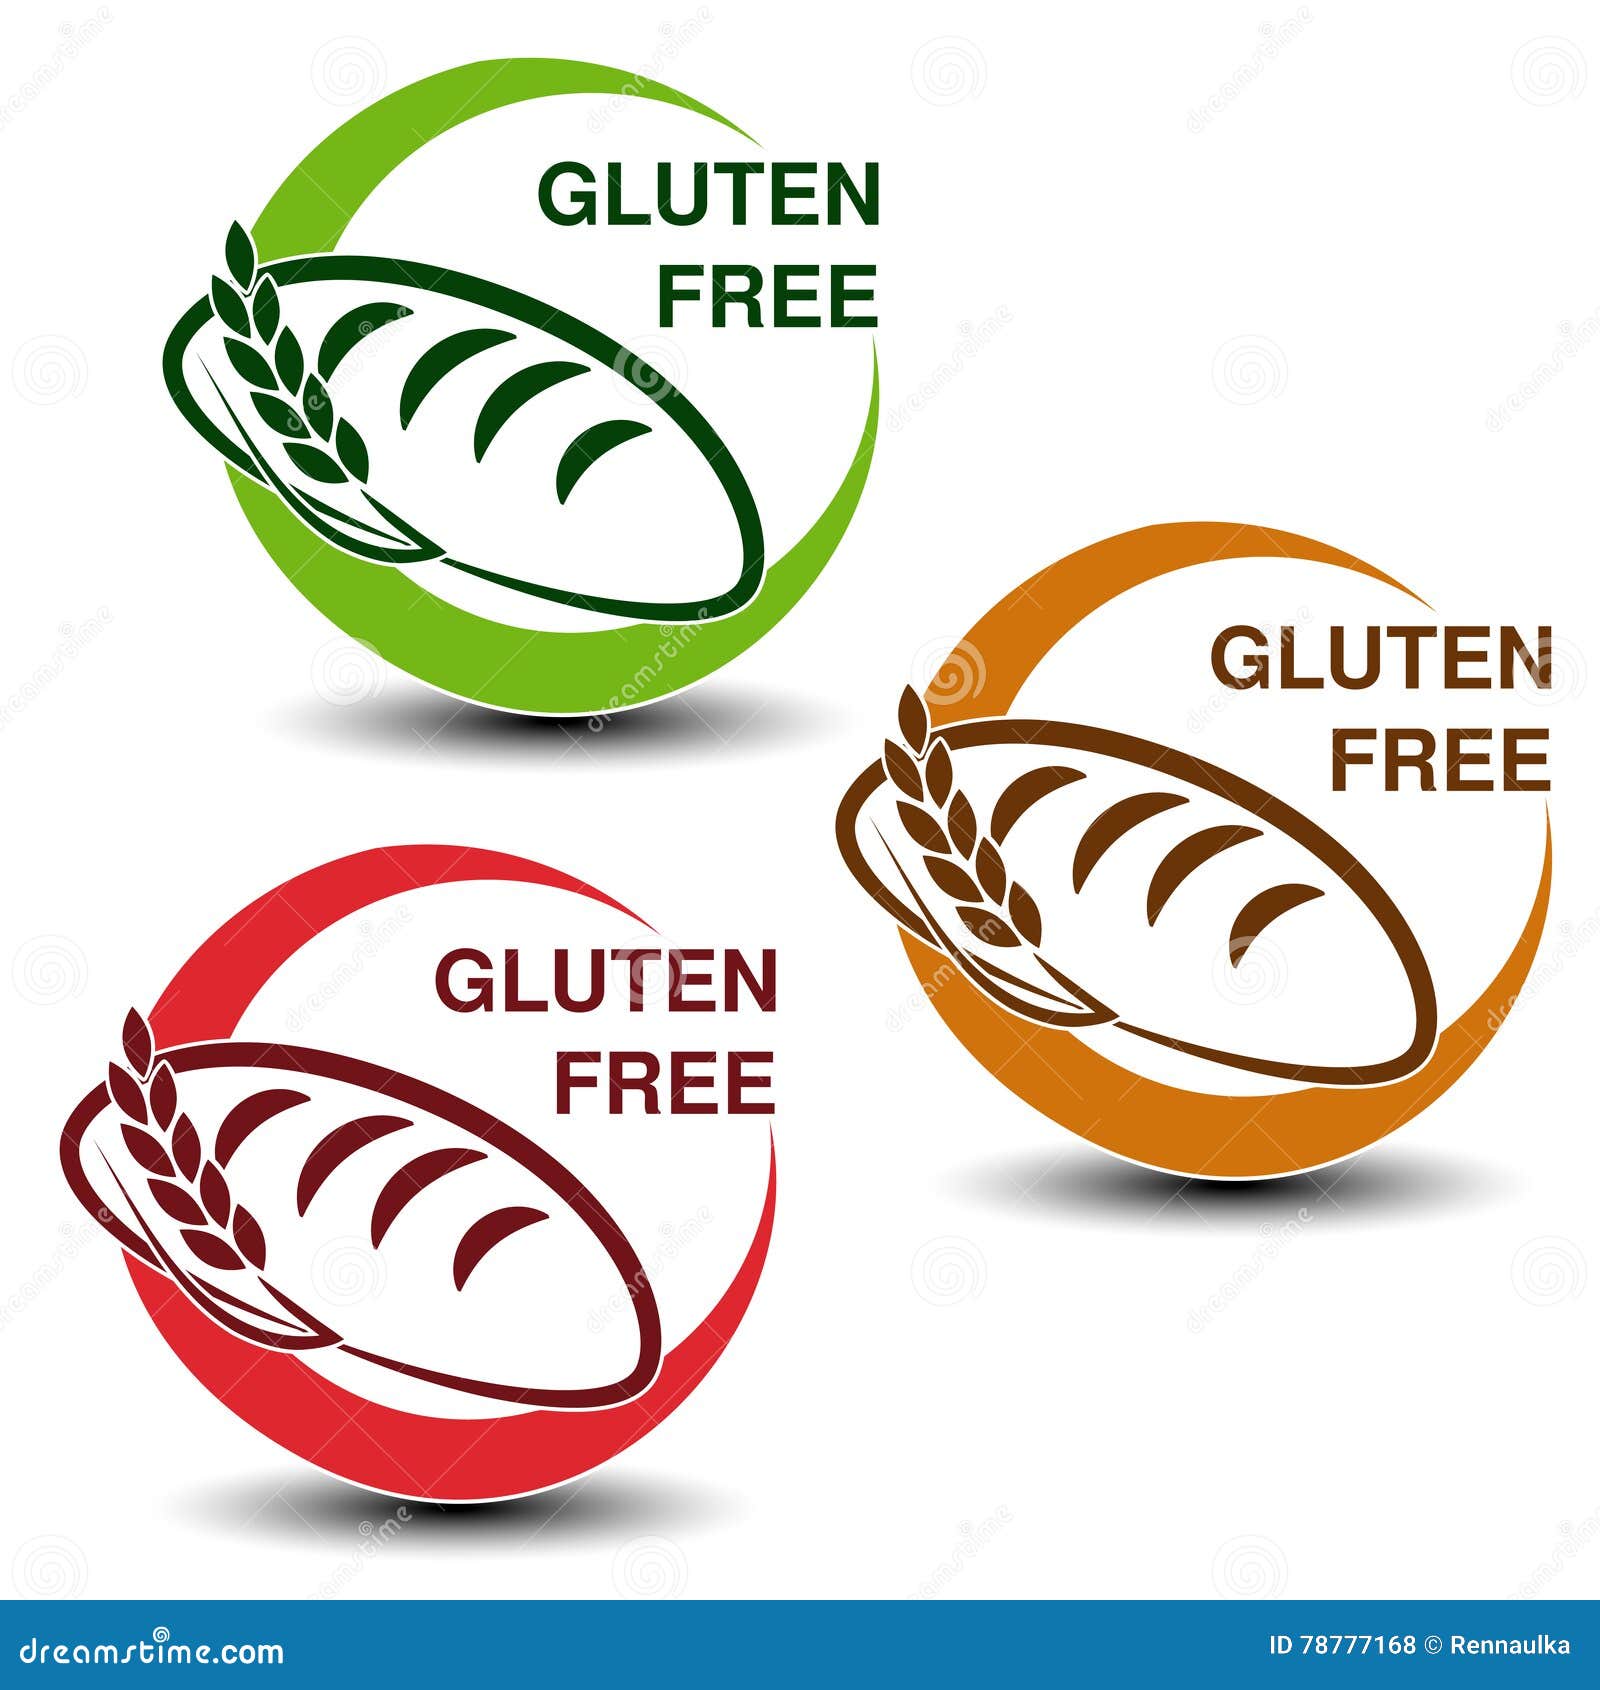 Download Gluten Free Symbols On White Background. Circular Icons With Silhouettes Of Bread With Spikelet ...